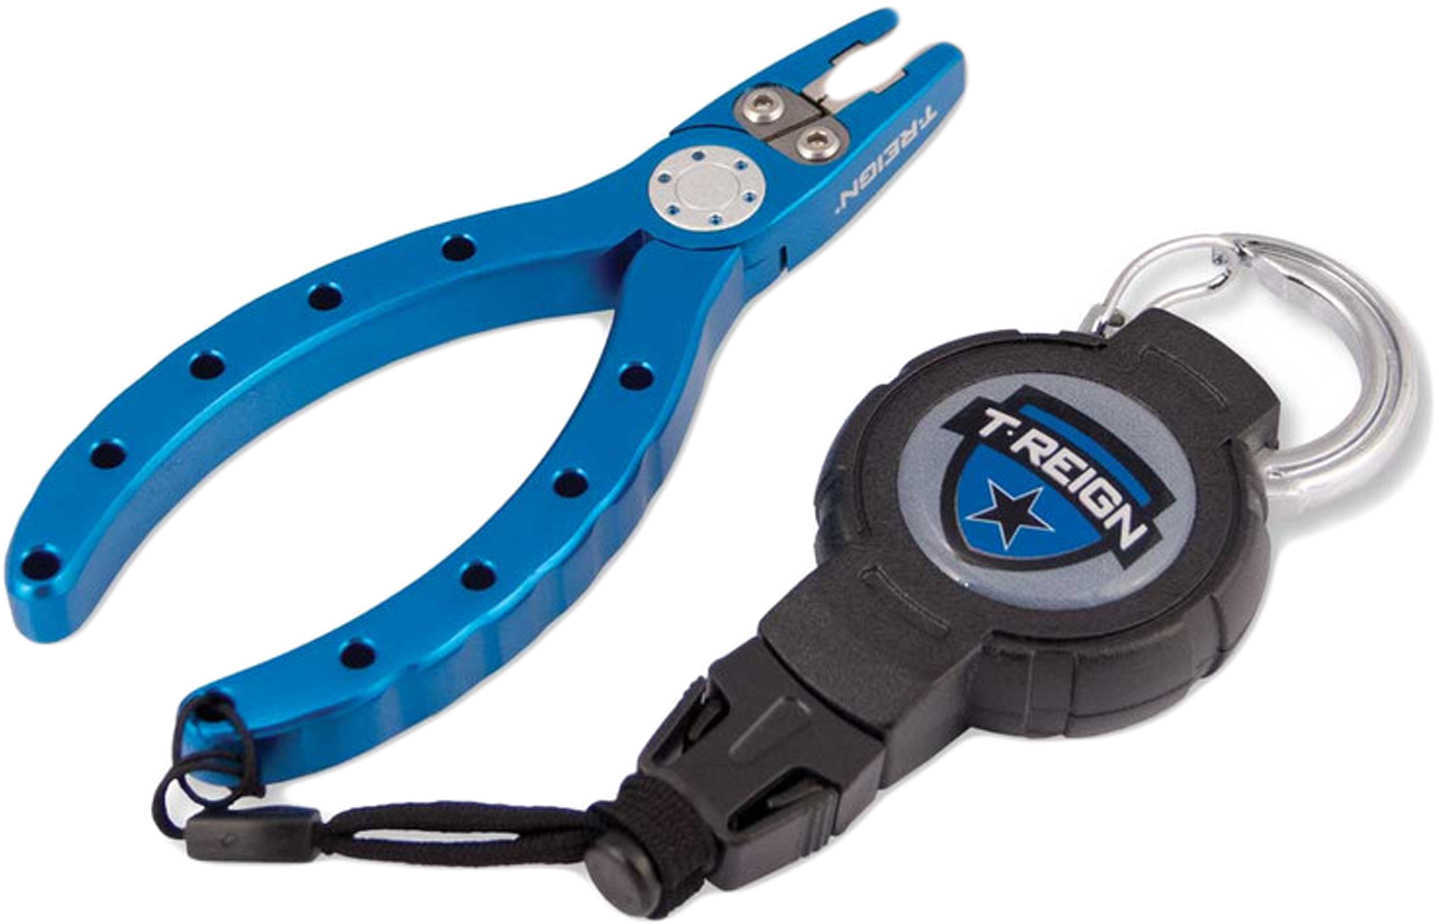 T-Reign RGT Pliers (carabiner) Md: 0TBP-0071